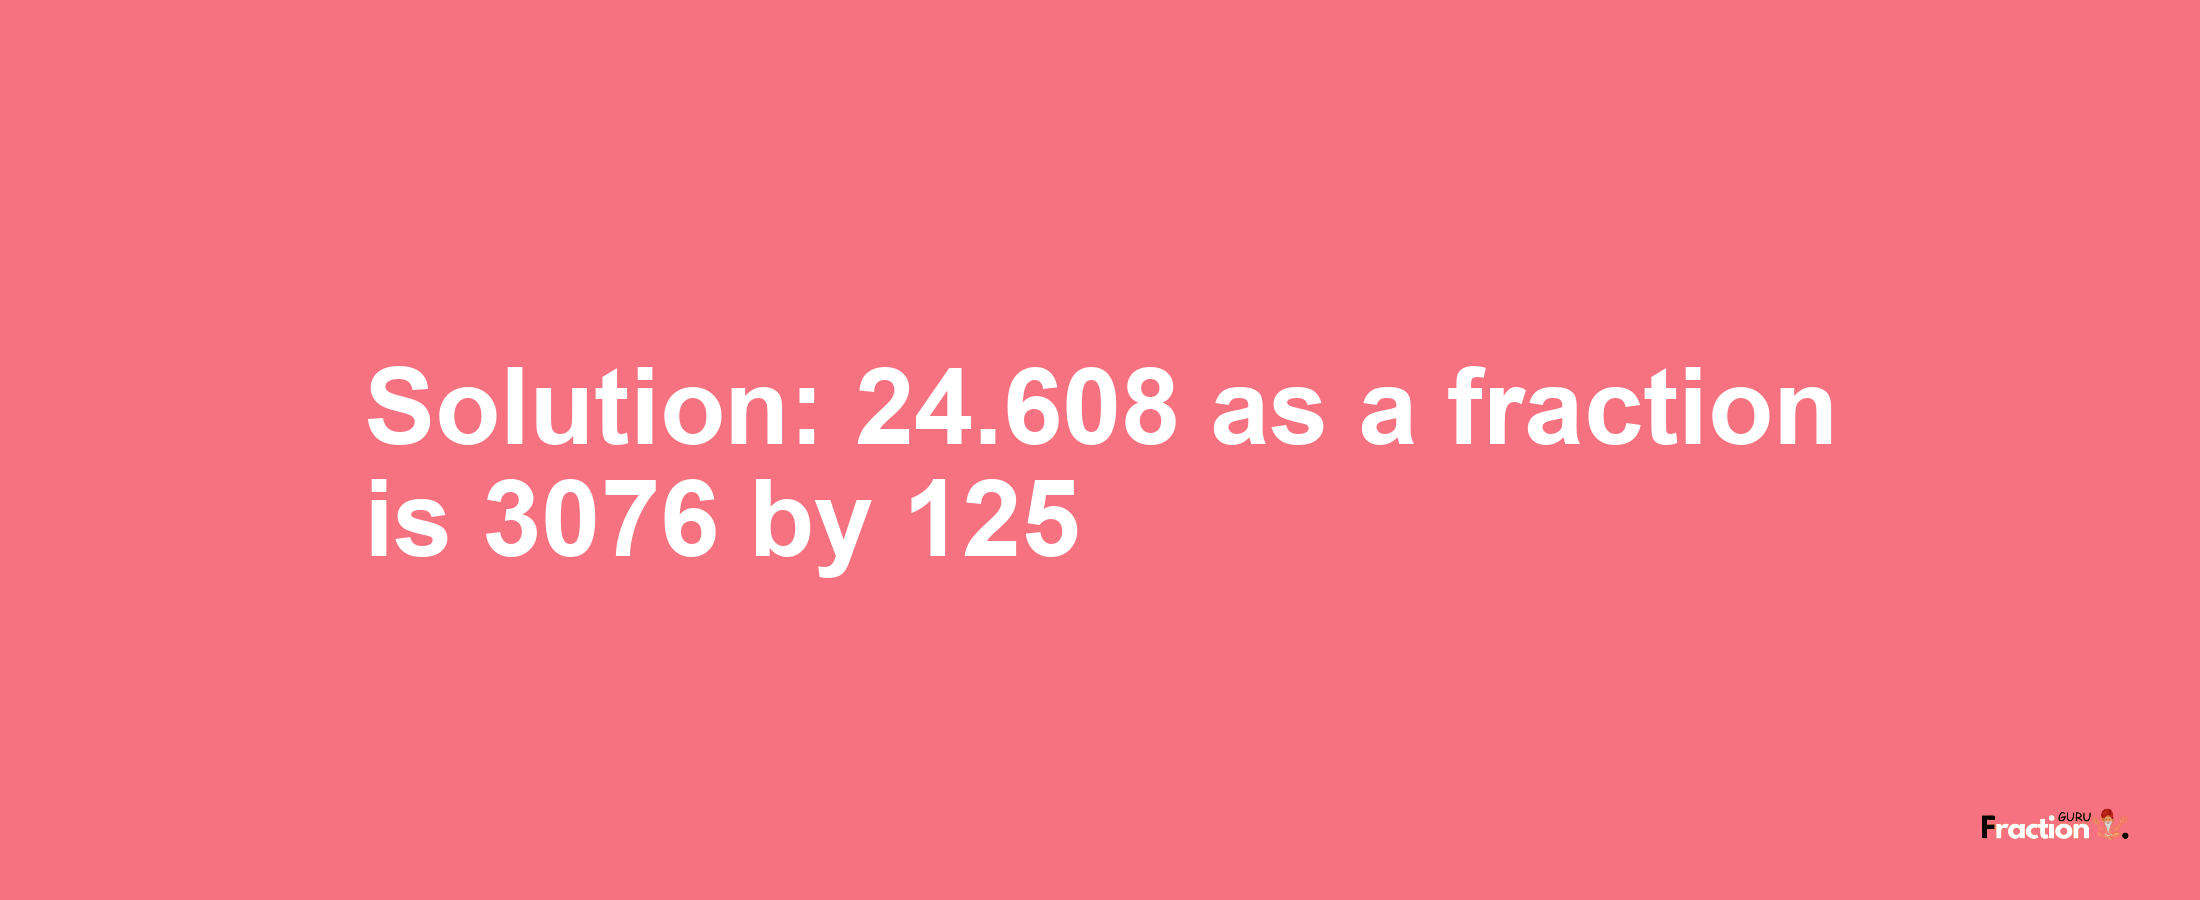 Solution:24.608 as a fraction is 3076/125